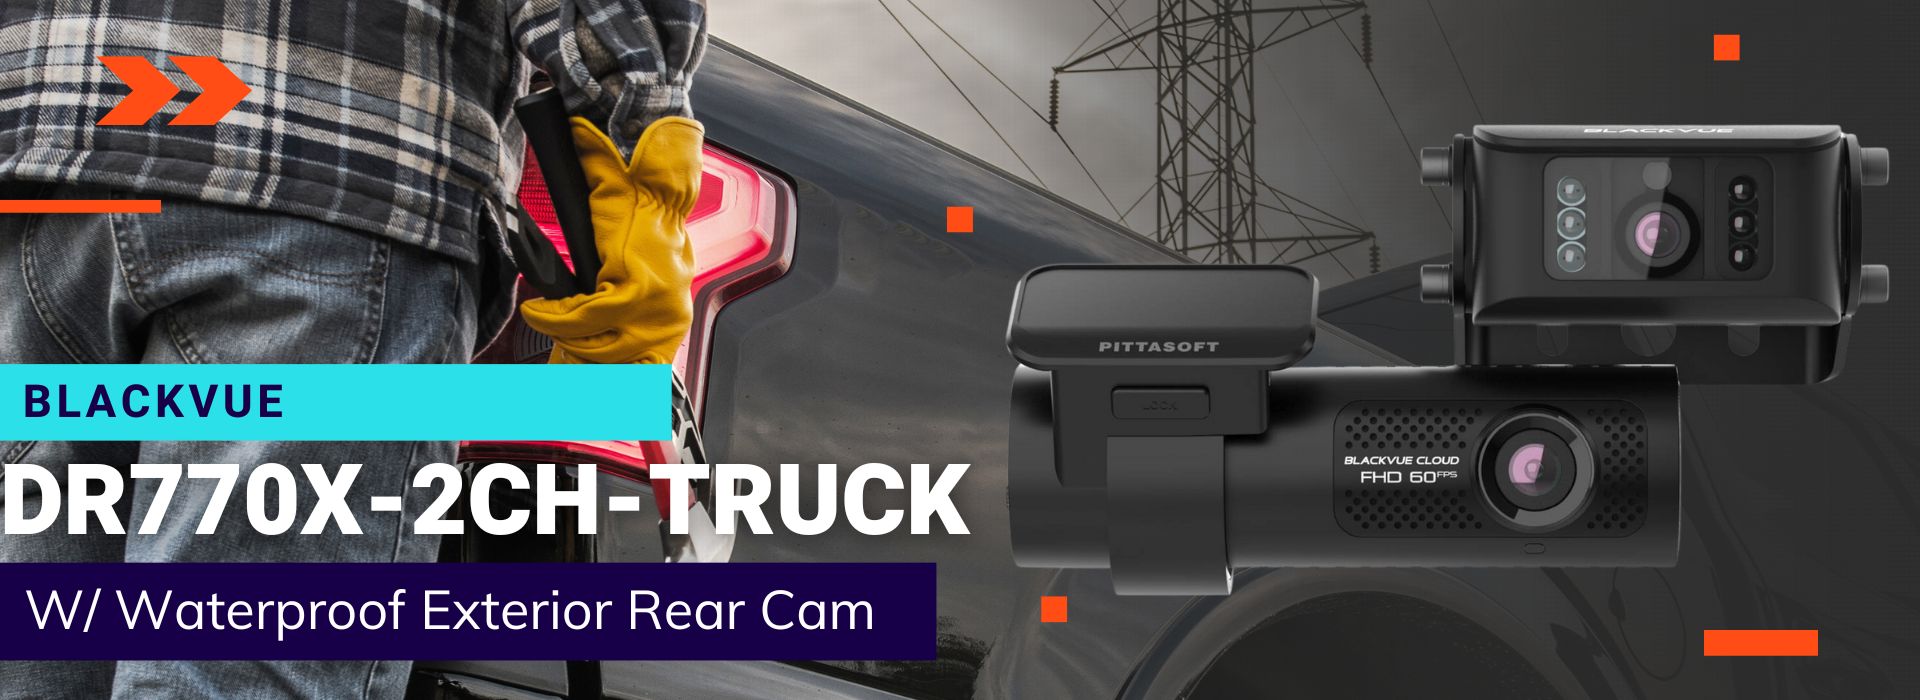 BlackVue DR770X-2CH-TRUCK | The Perfect Dashcam For Trucks And Heavy Vehicles